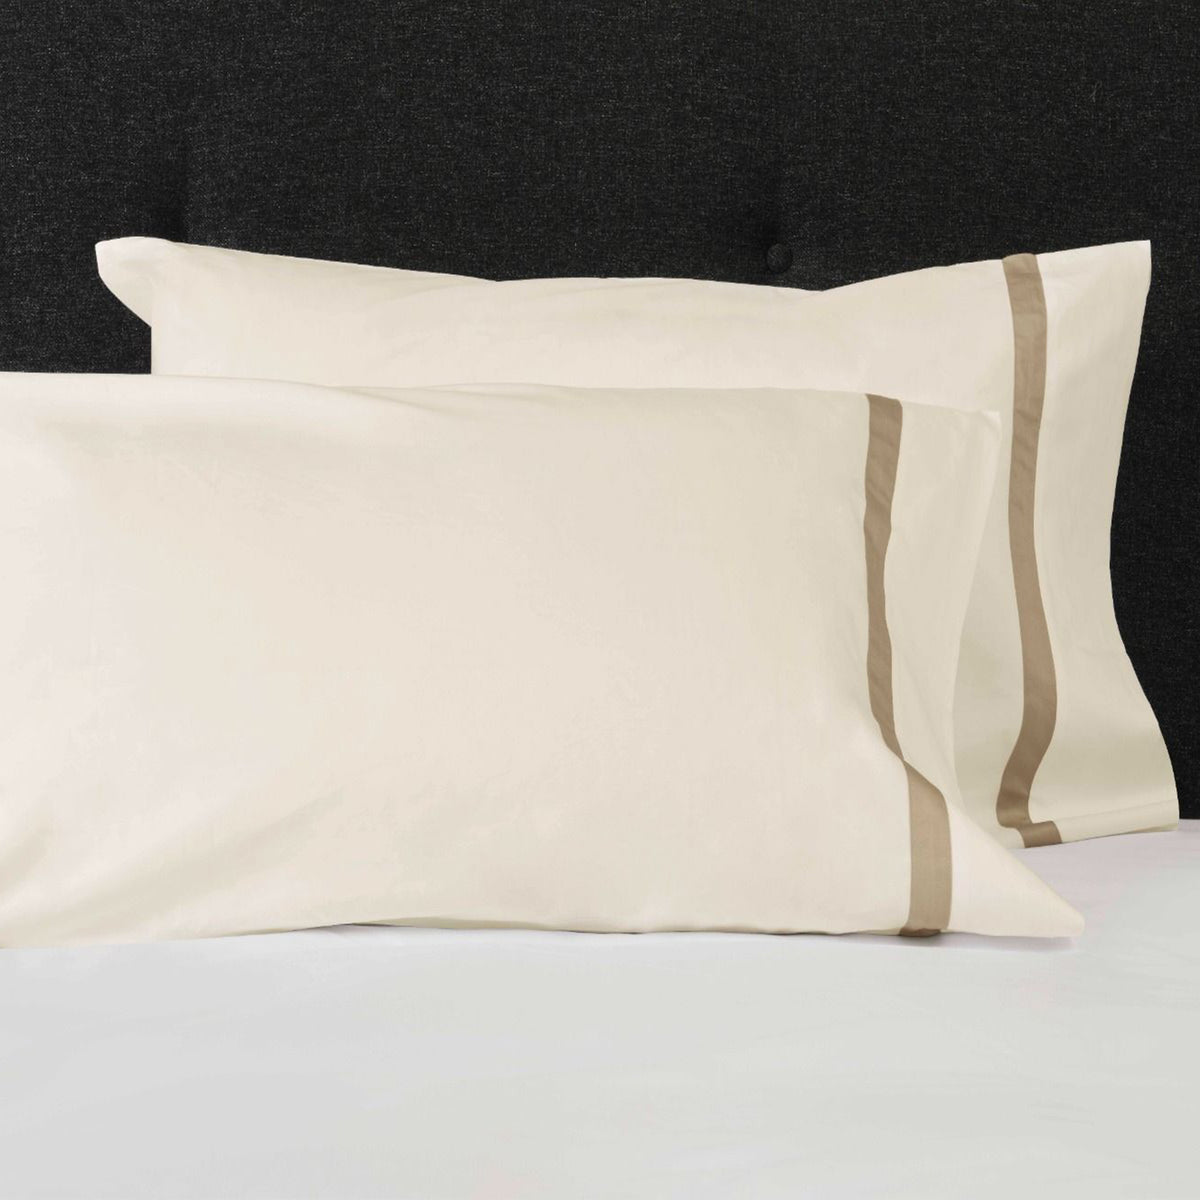 Pair of Pillowcases of Signoria Pegaso Bedding in Ivory/Flax Color